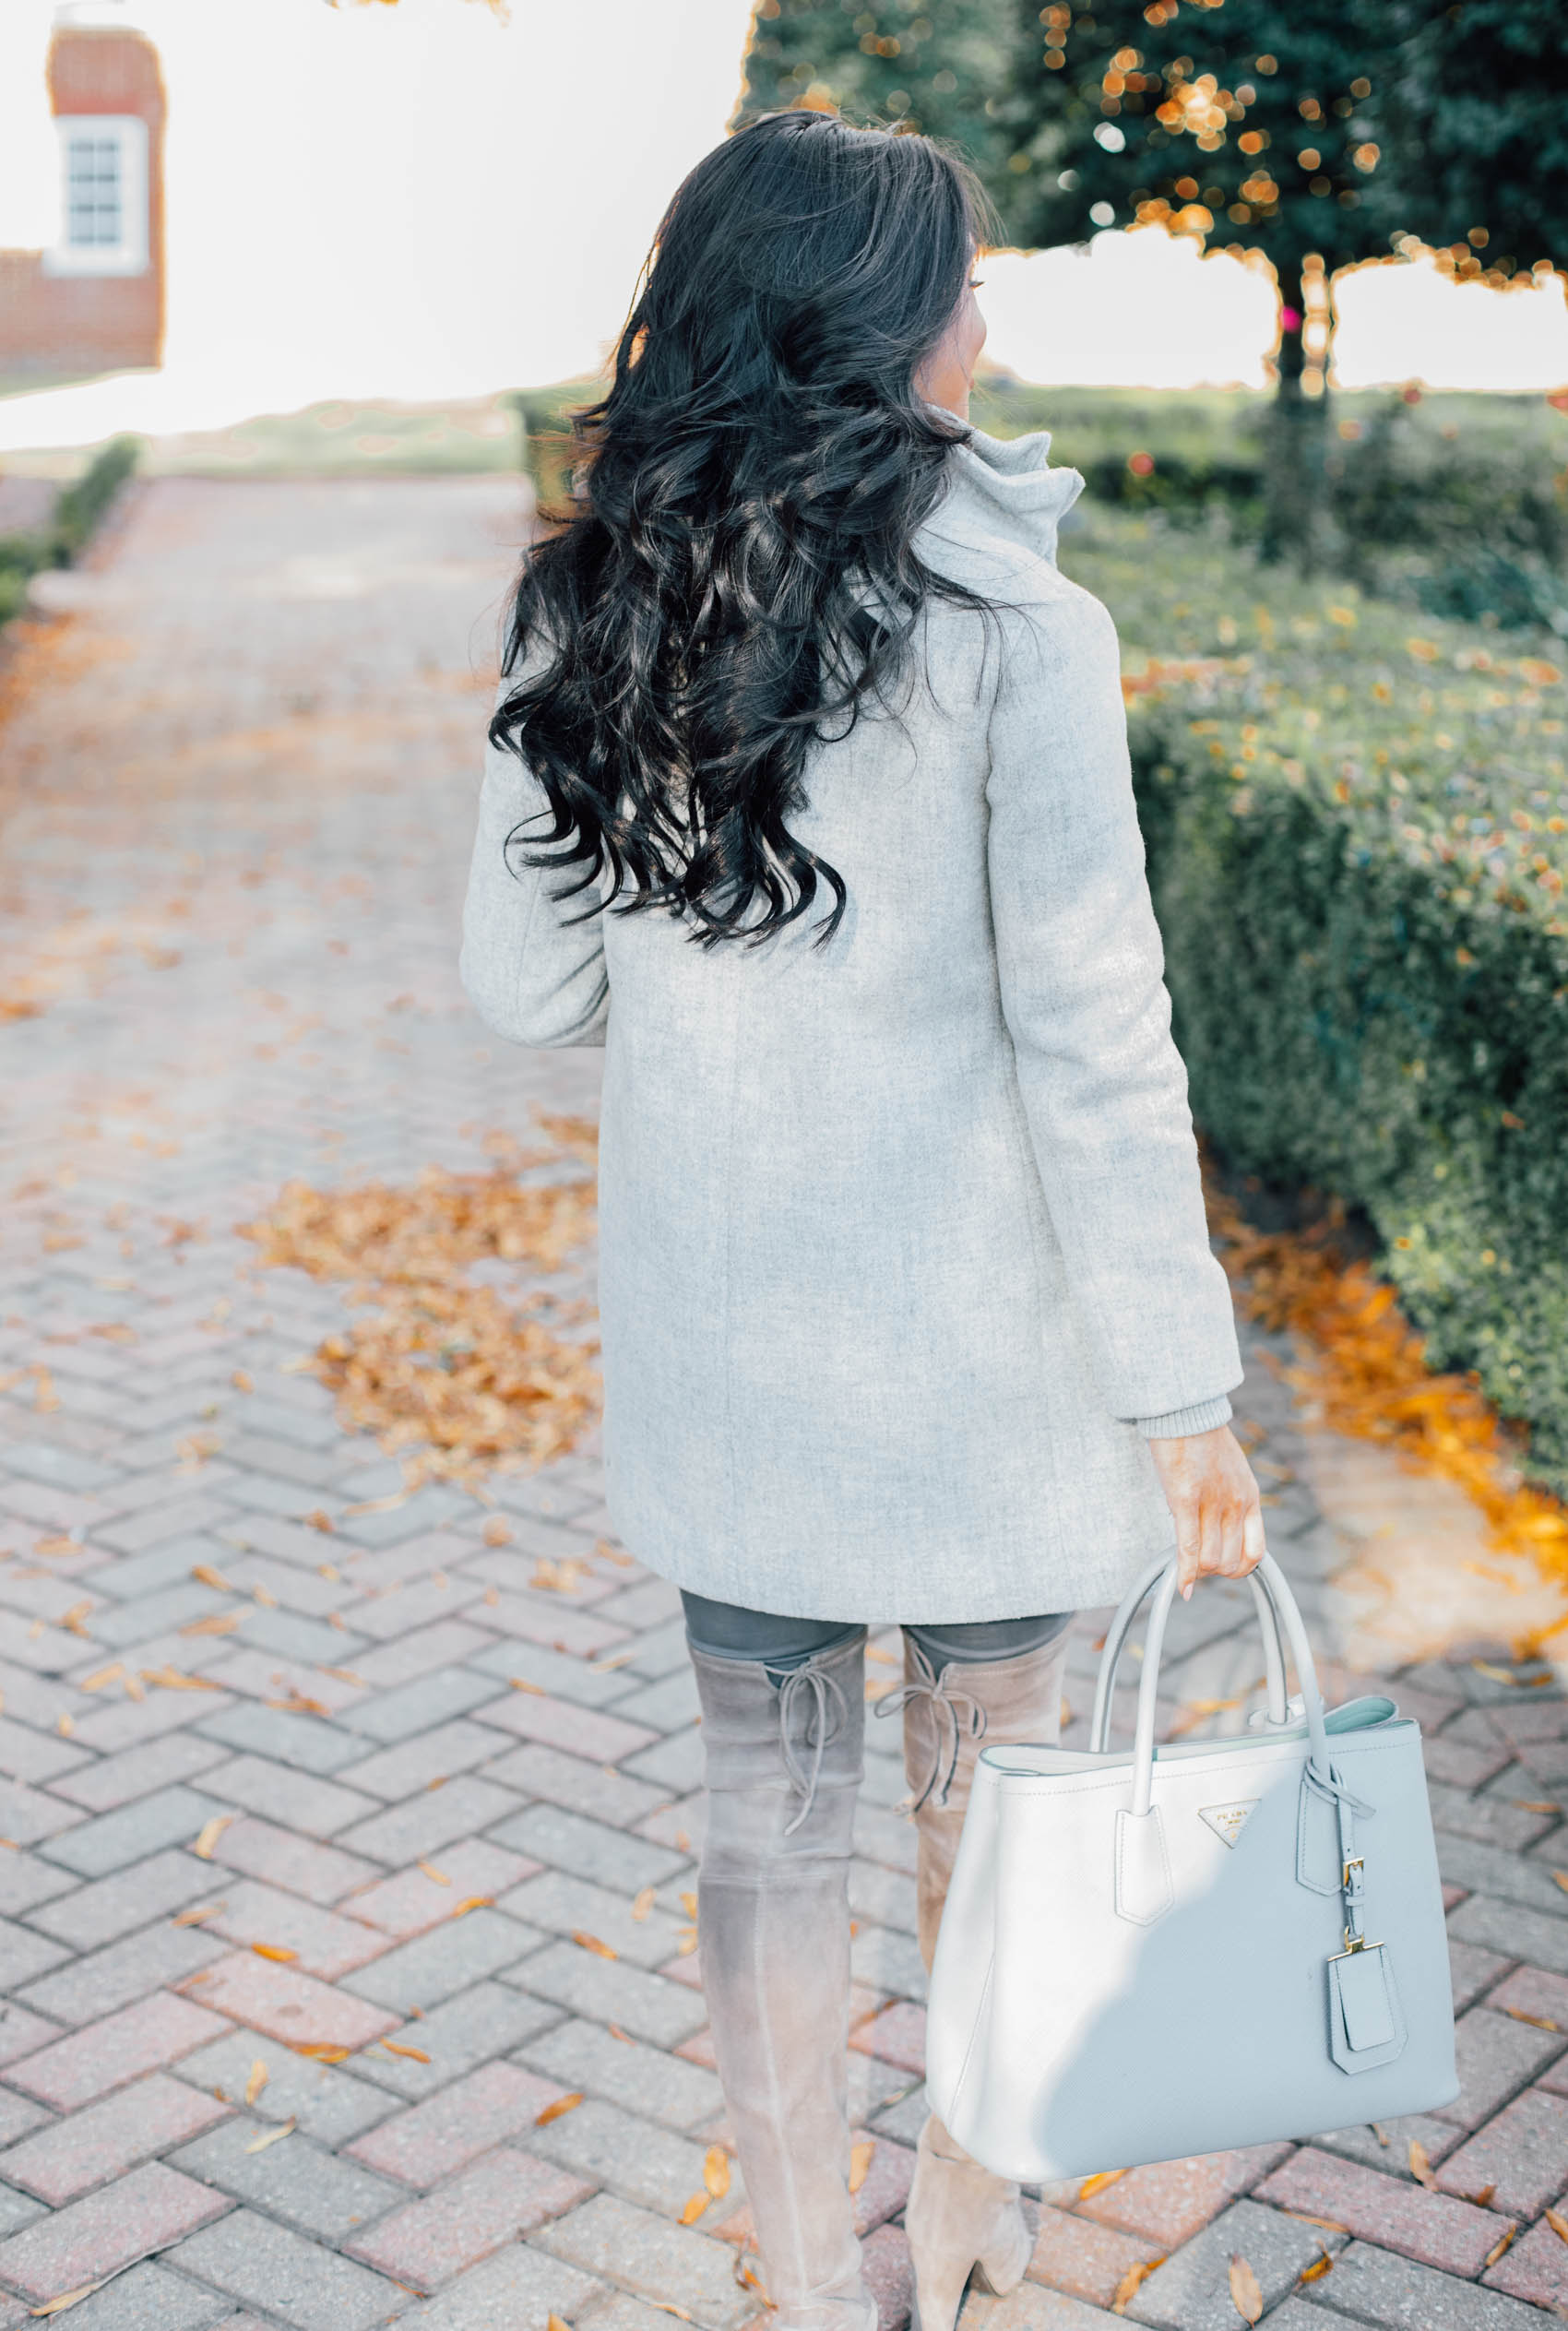 Blogger Hoang-Kim wears a gray wool coat perfect for petite women